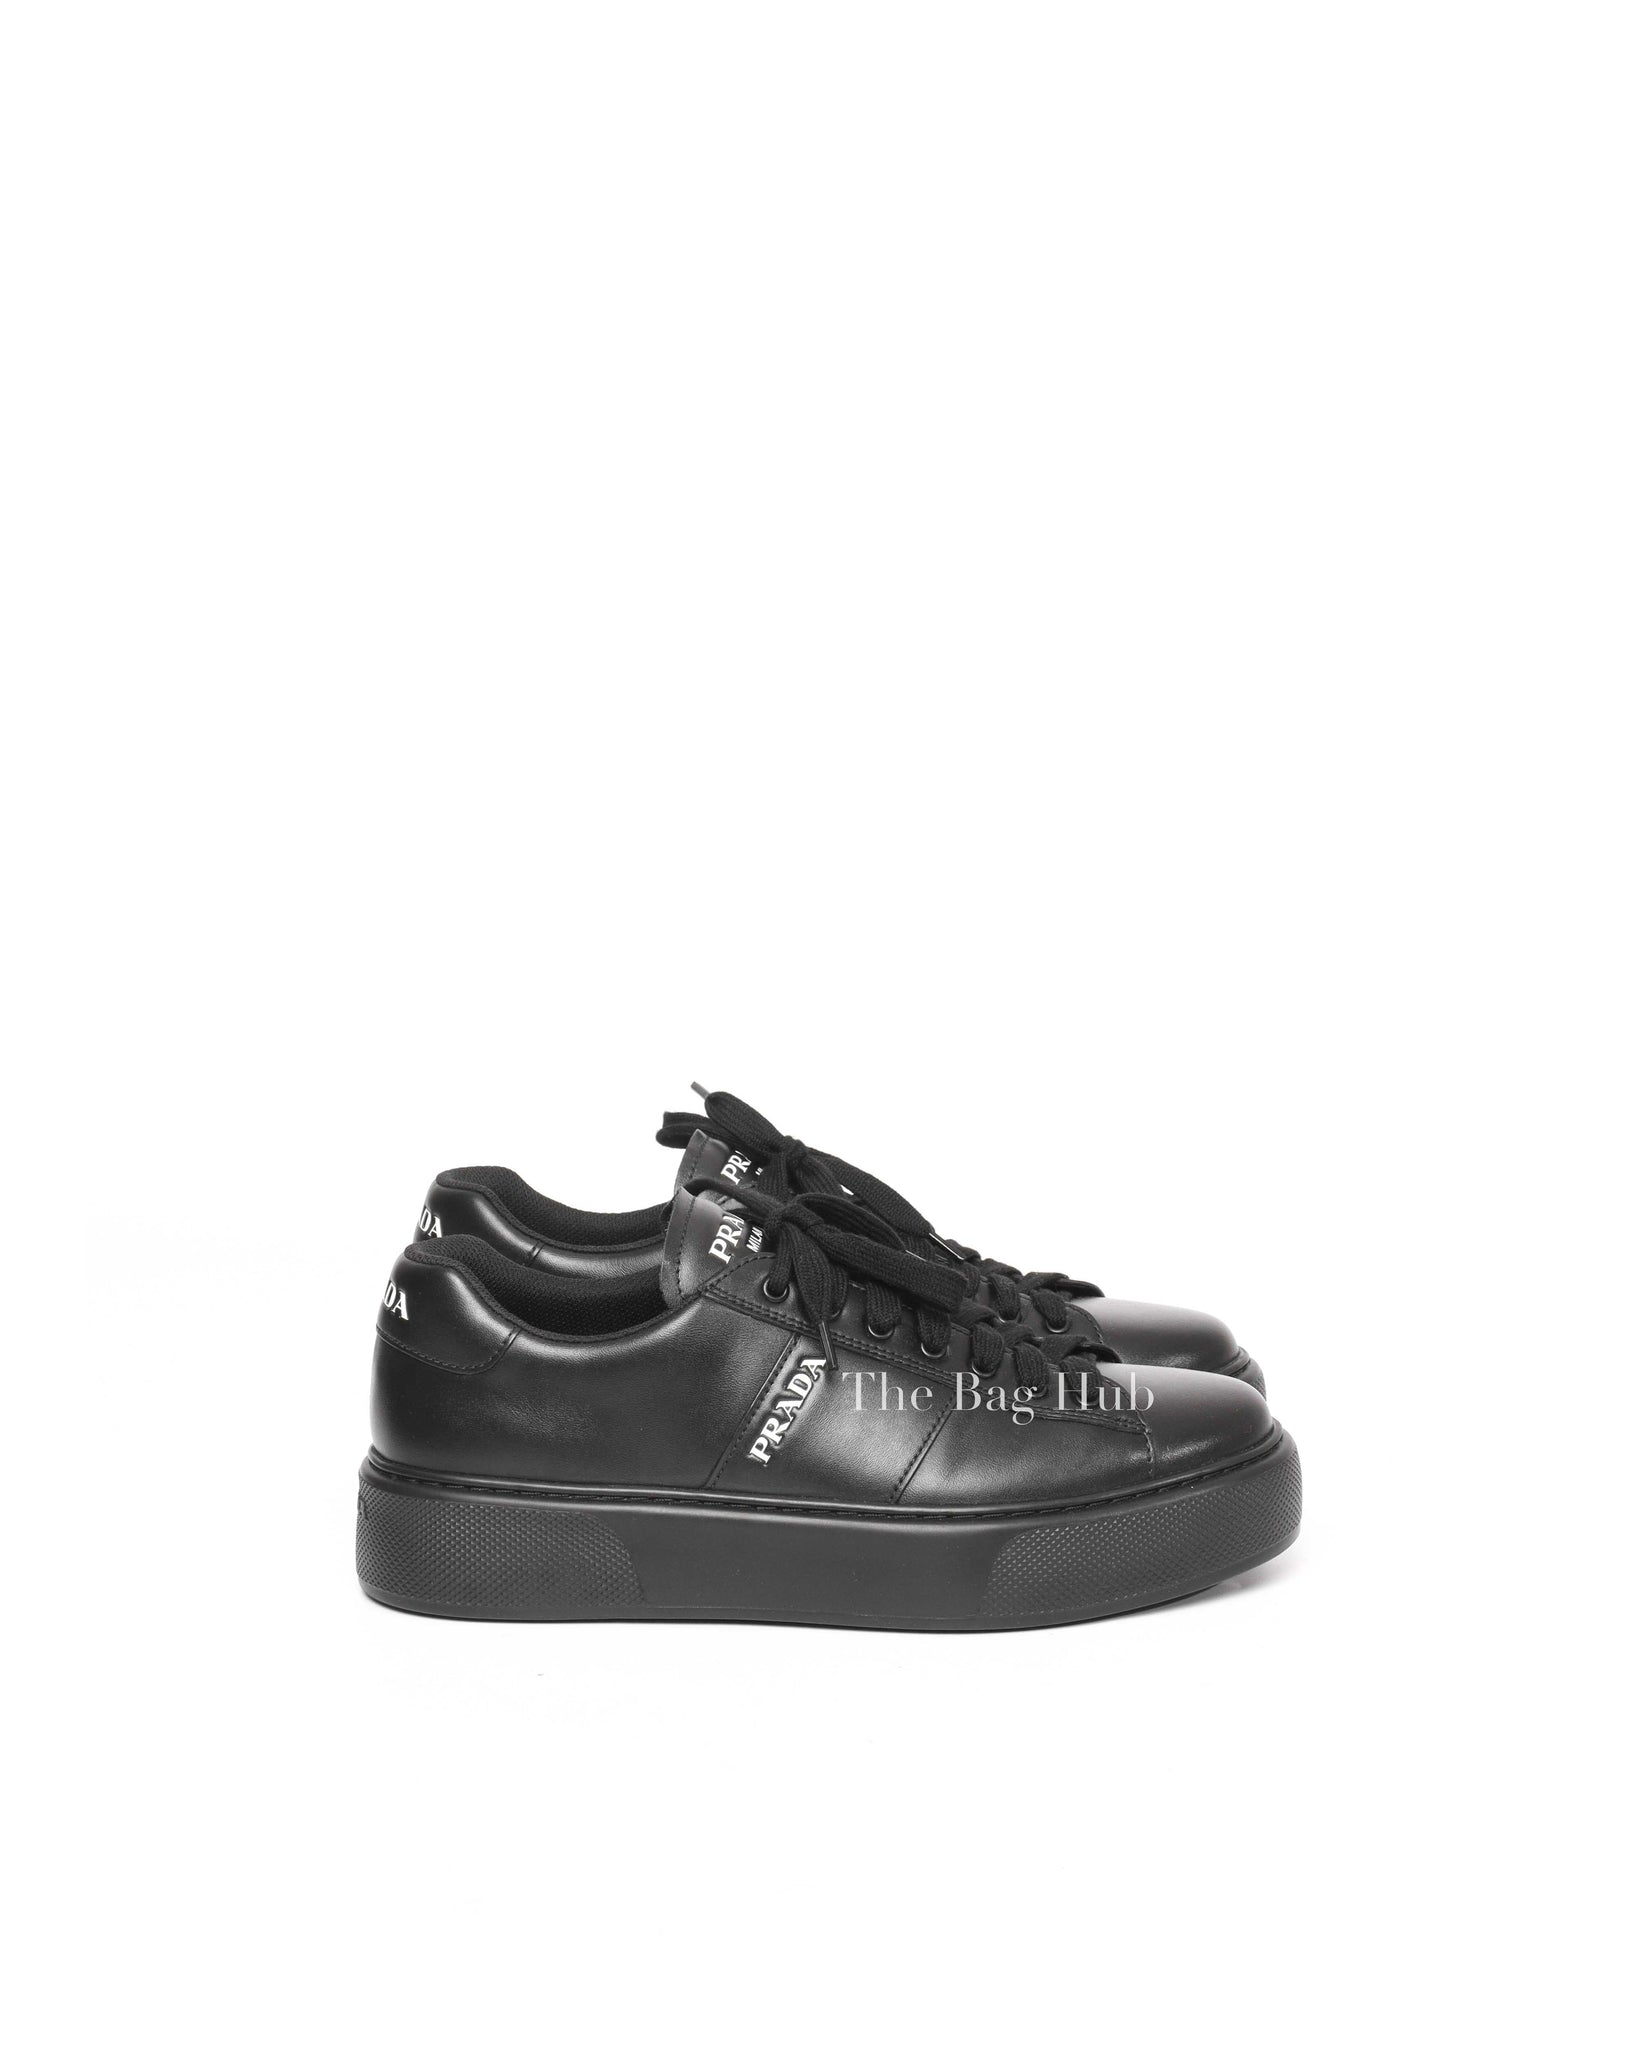 Prada Black Leather Lace Up Men's Sneakers Size 11-5